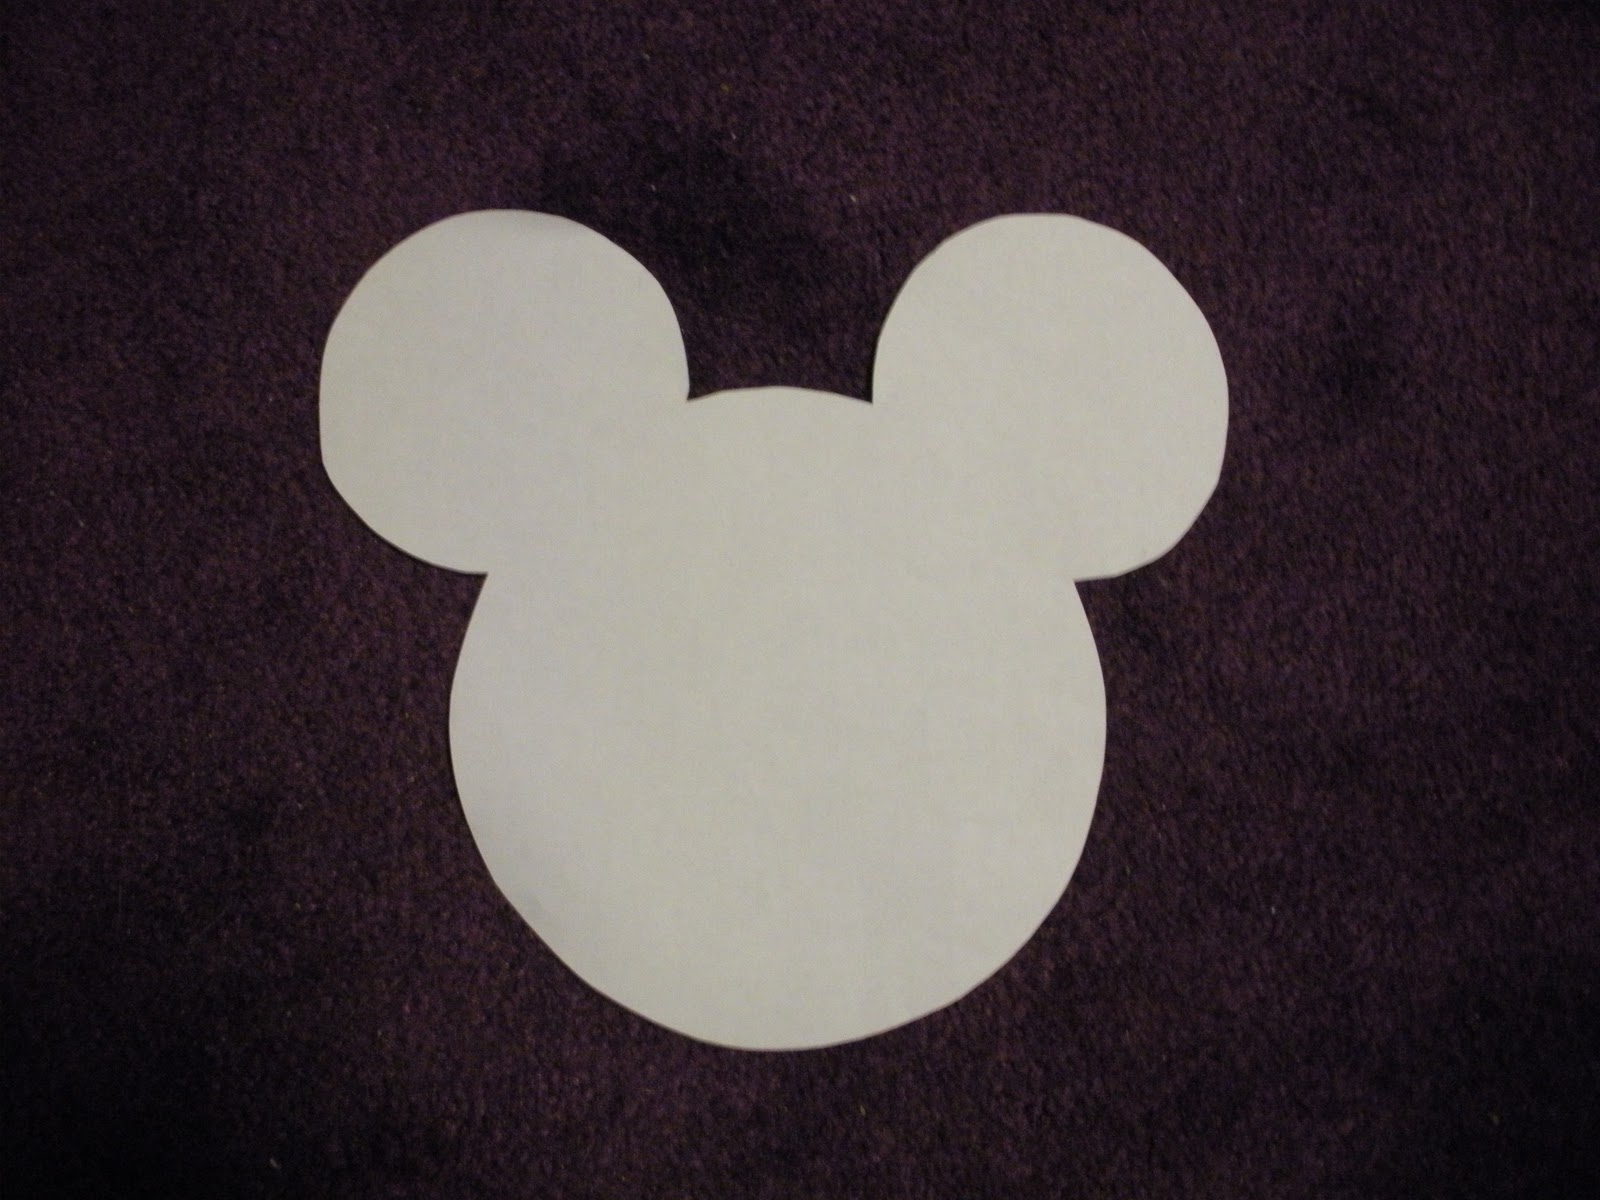 Mickey Mouse Head 247 Hd Wallpapers in Cartoons - Imagesci.com